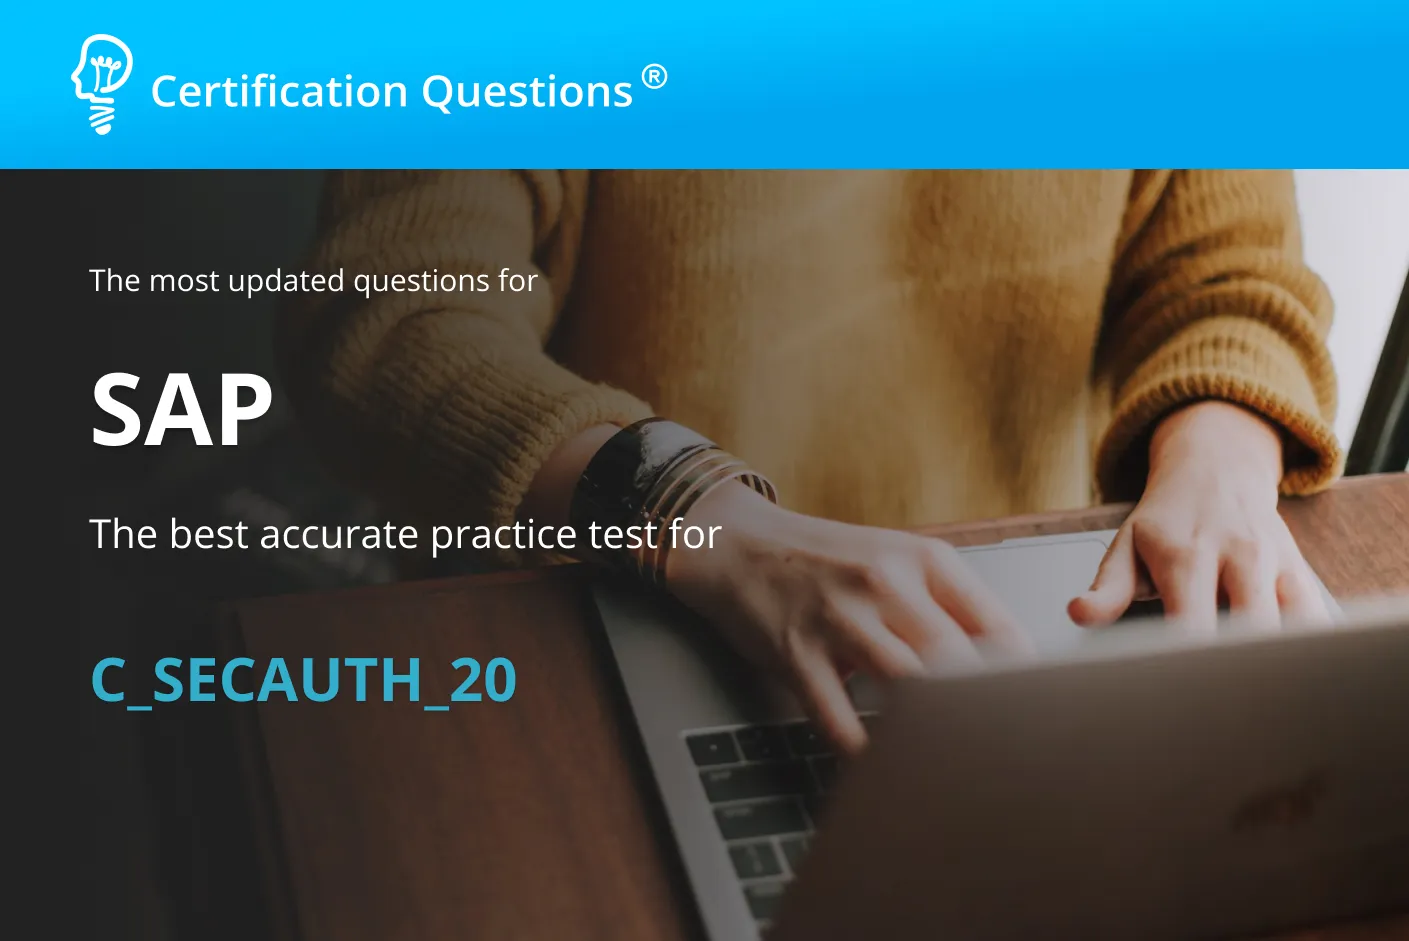 This image represents the C-SECAUTH-20 Questions test in the USA